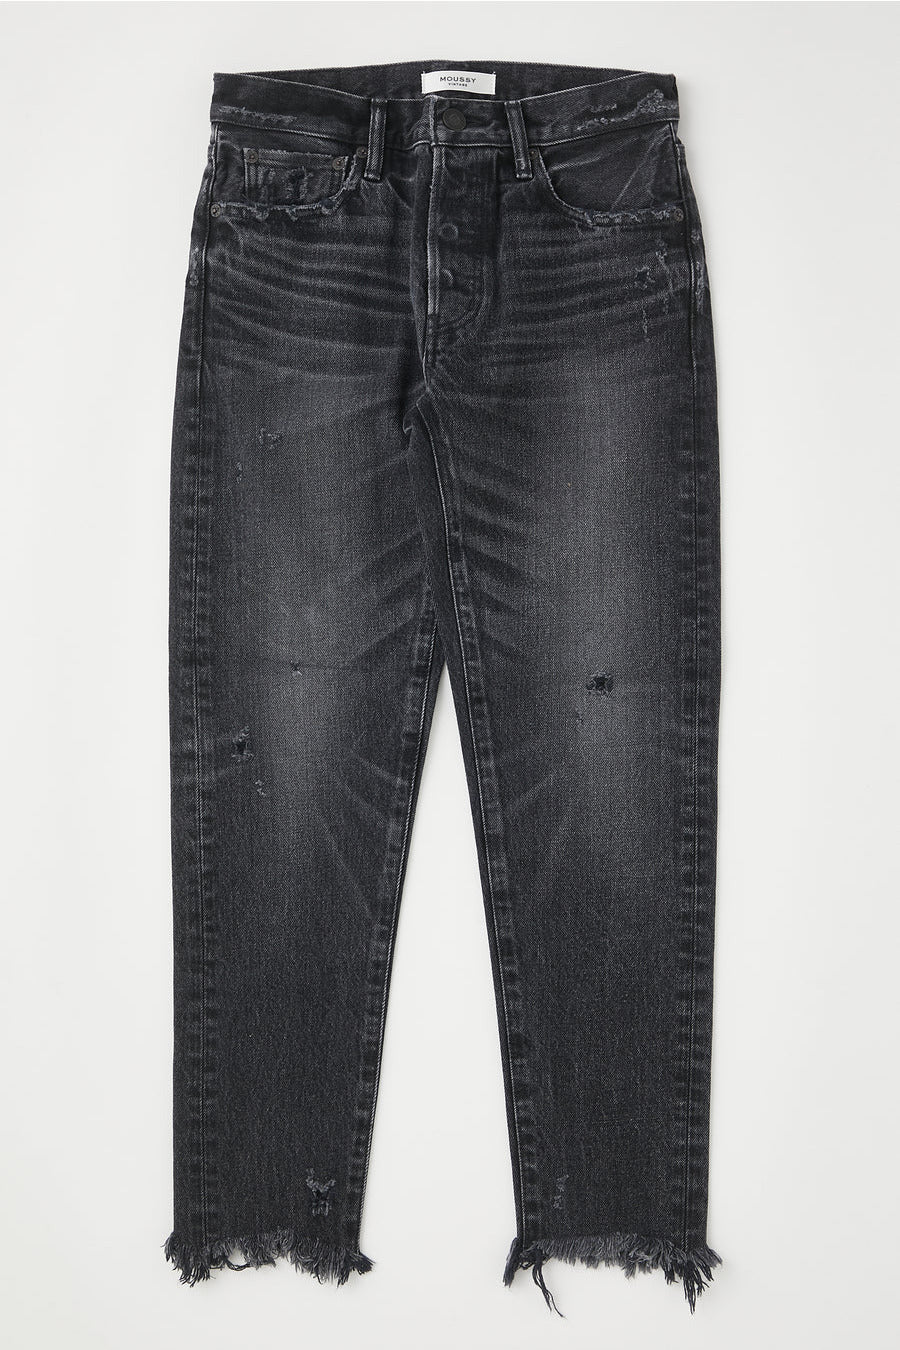 Moussy Tapered Black jeans, available at west2westport.com